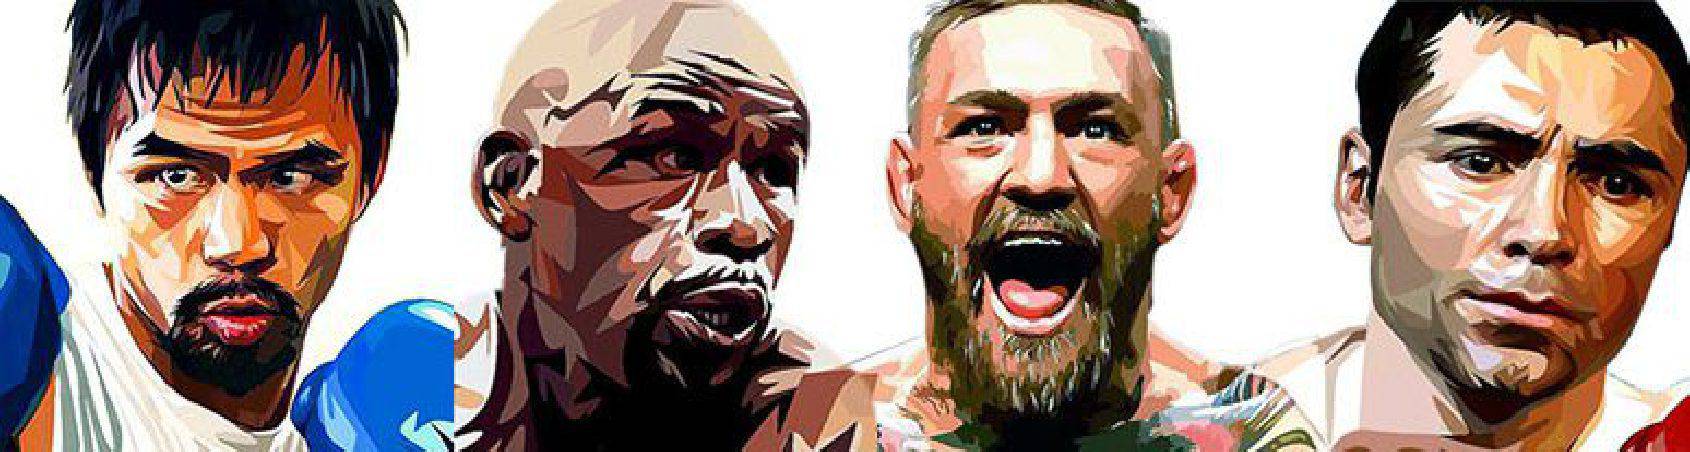 Pop-Art style paintings: current and legendary boxers - to buy